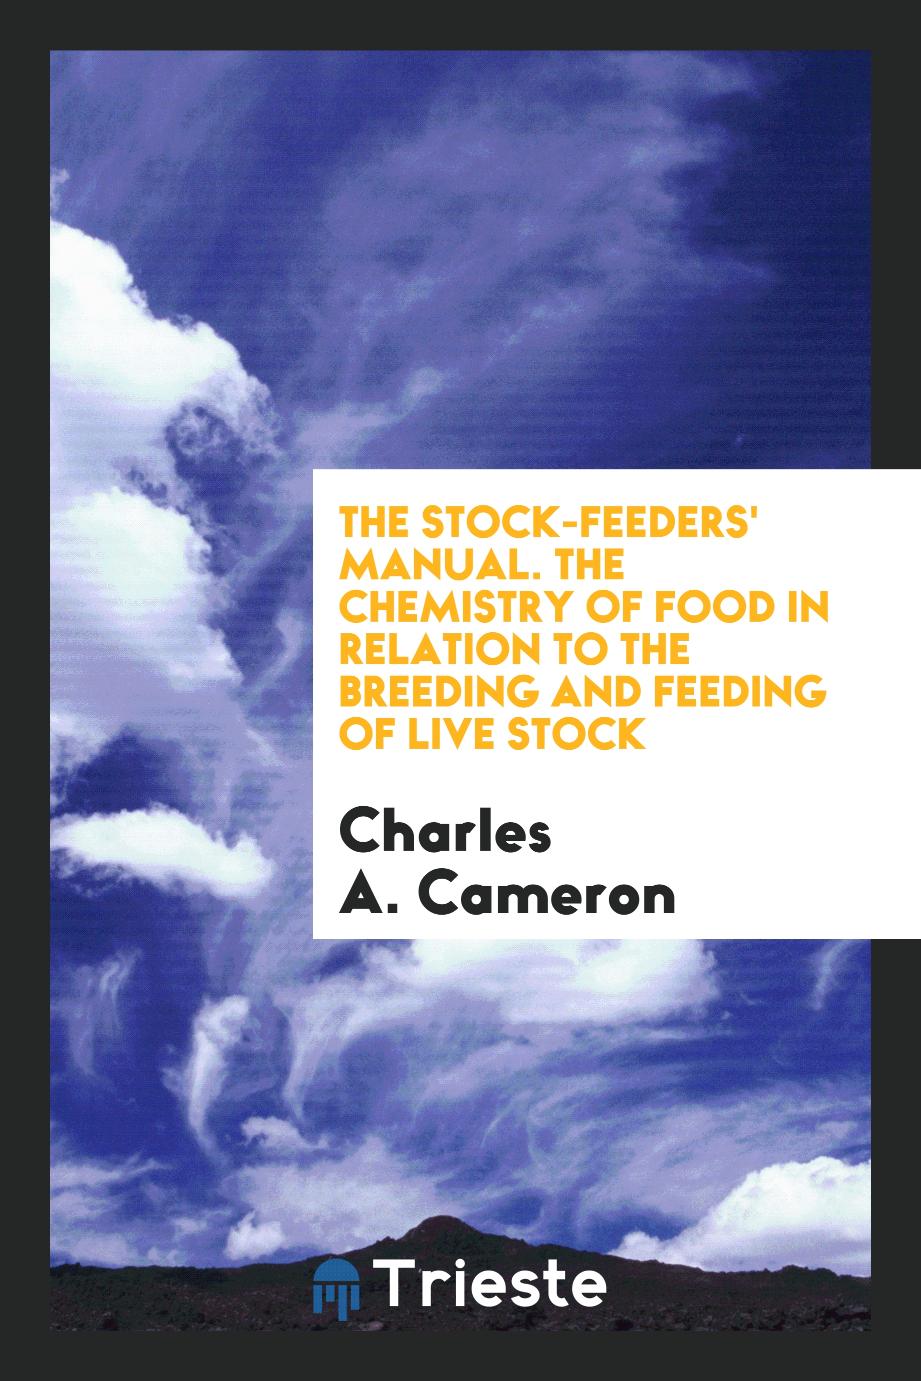 The Stock-Feeders' Manual. The Chemistry of Food in Relation to the Breeding and Feeding of Live Stock